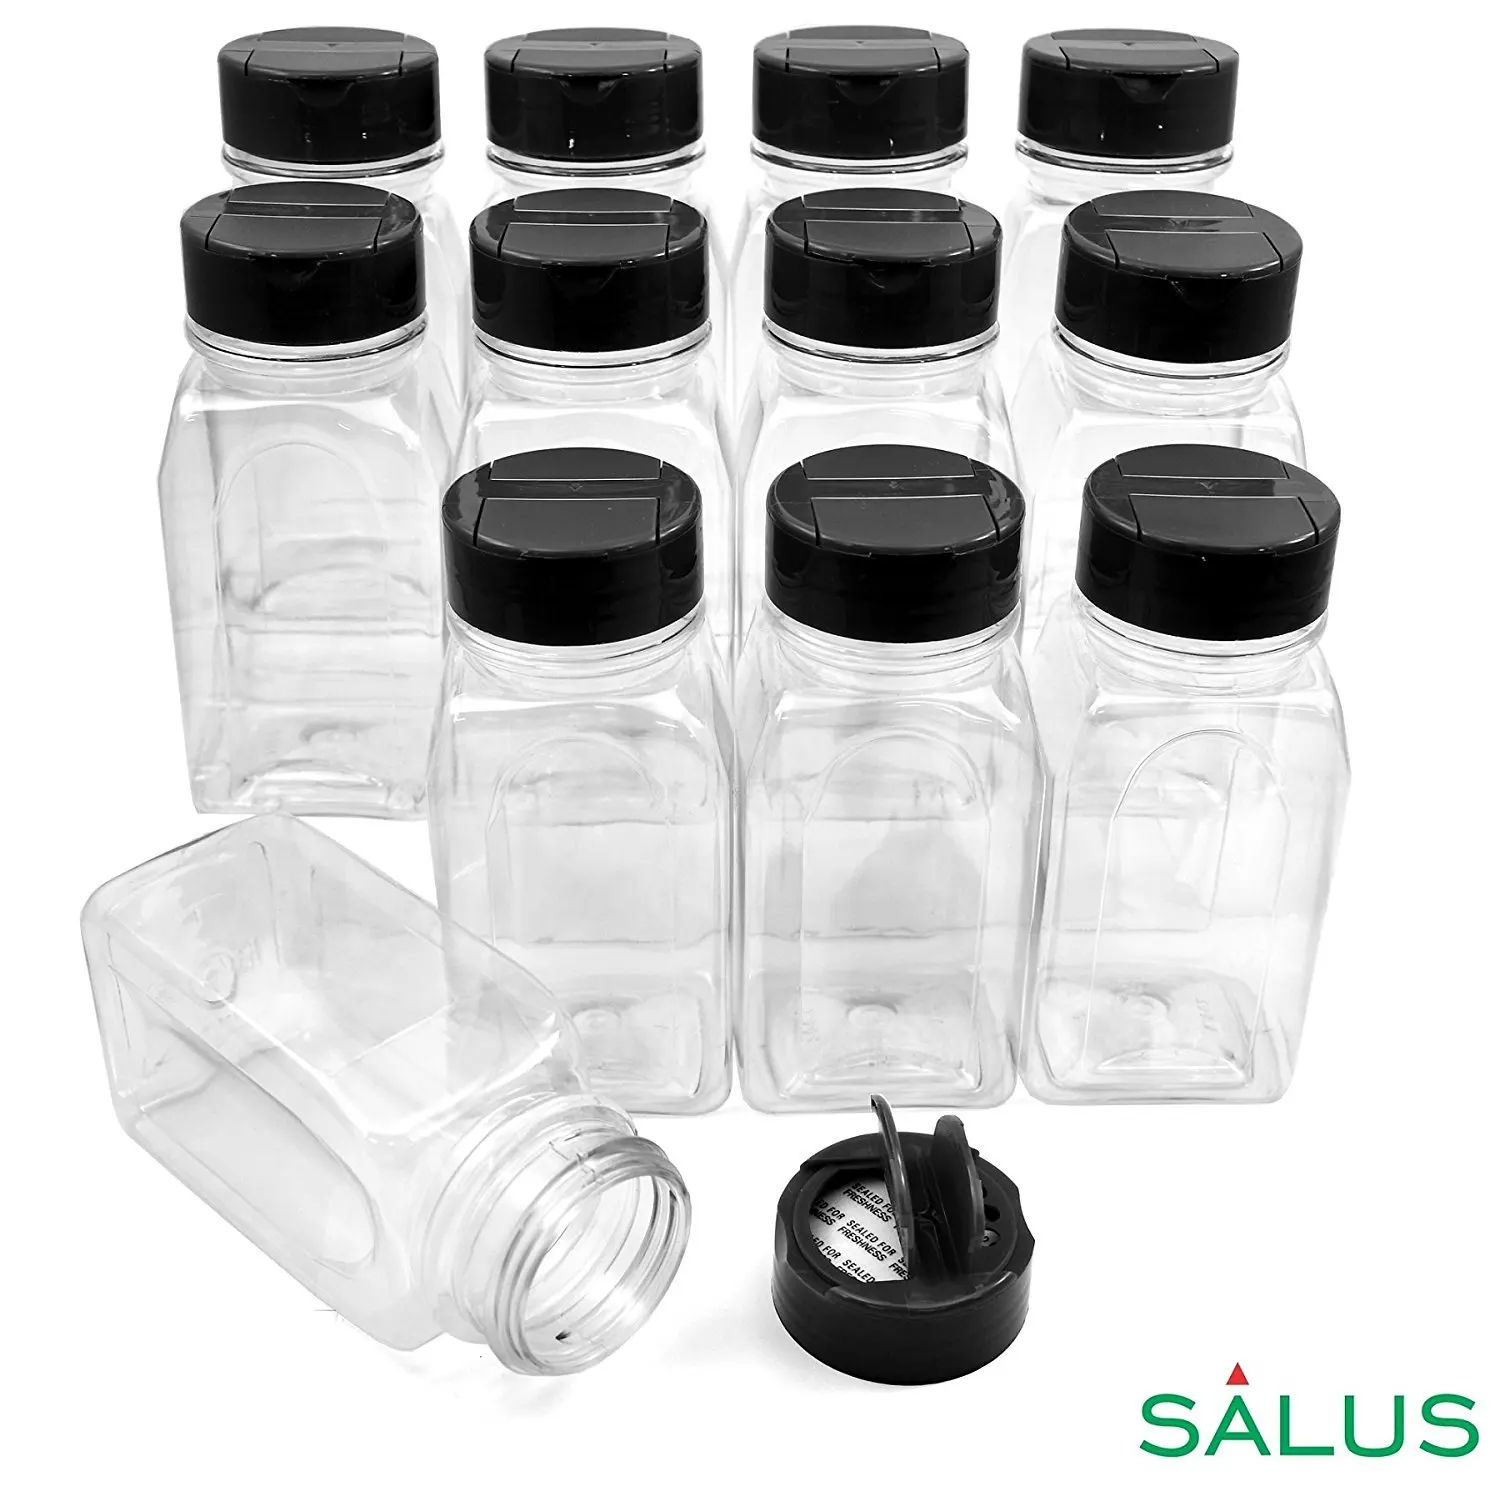 1 oz plastic spice jars with sifter and cap